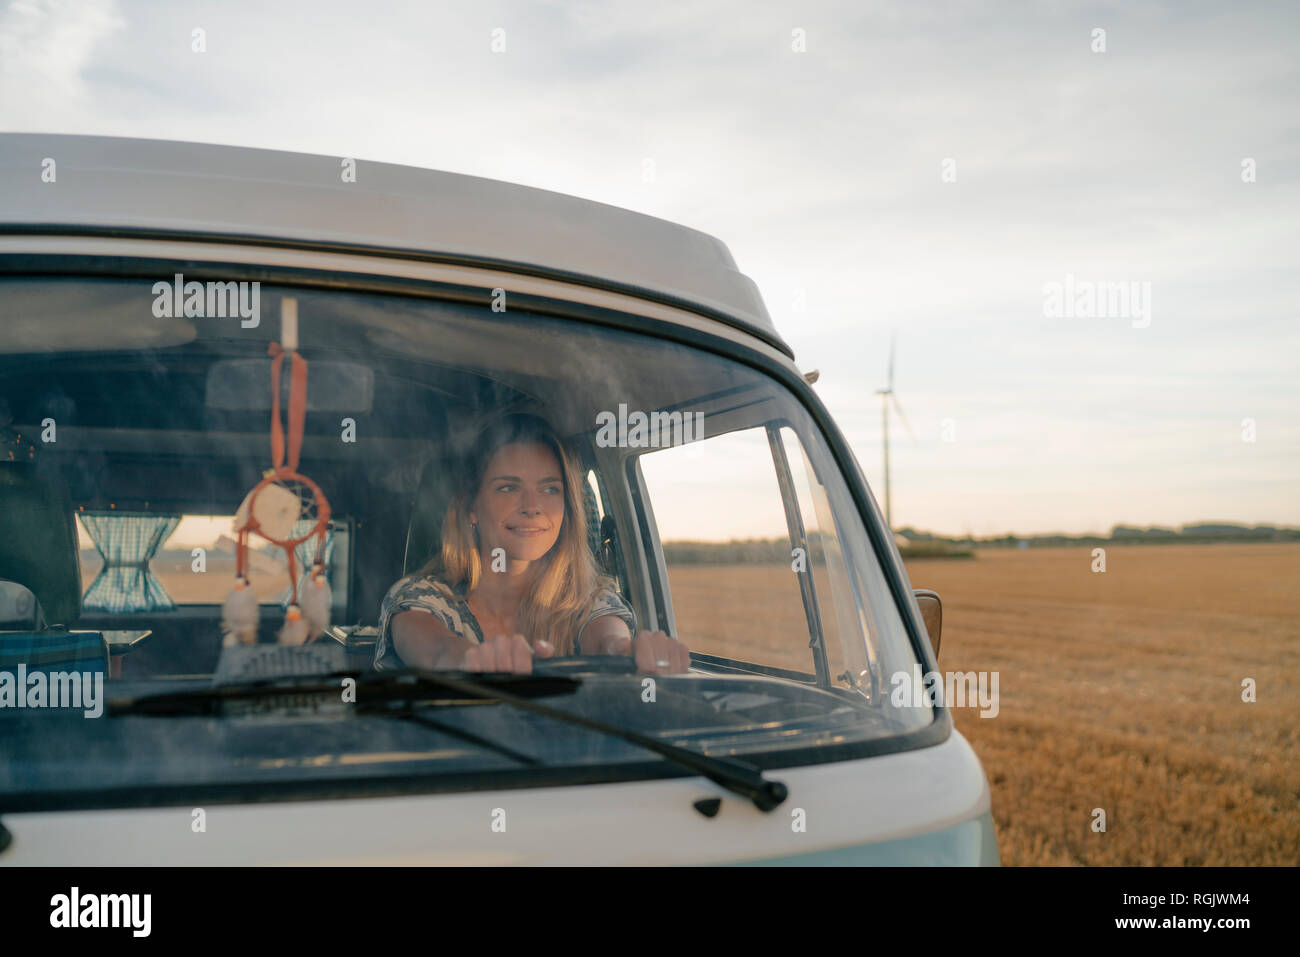 Smiling young woman driving camper van in rural landscape Stock Photo